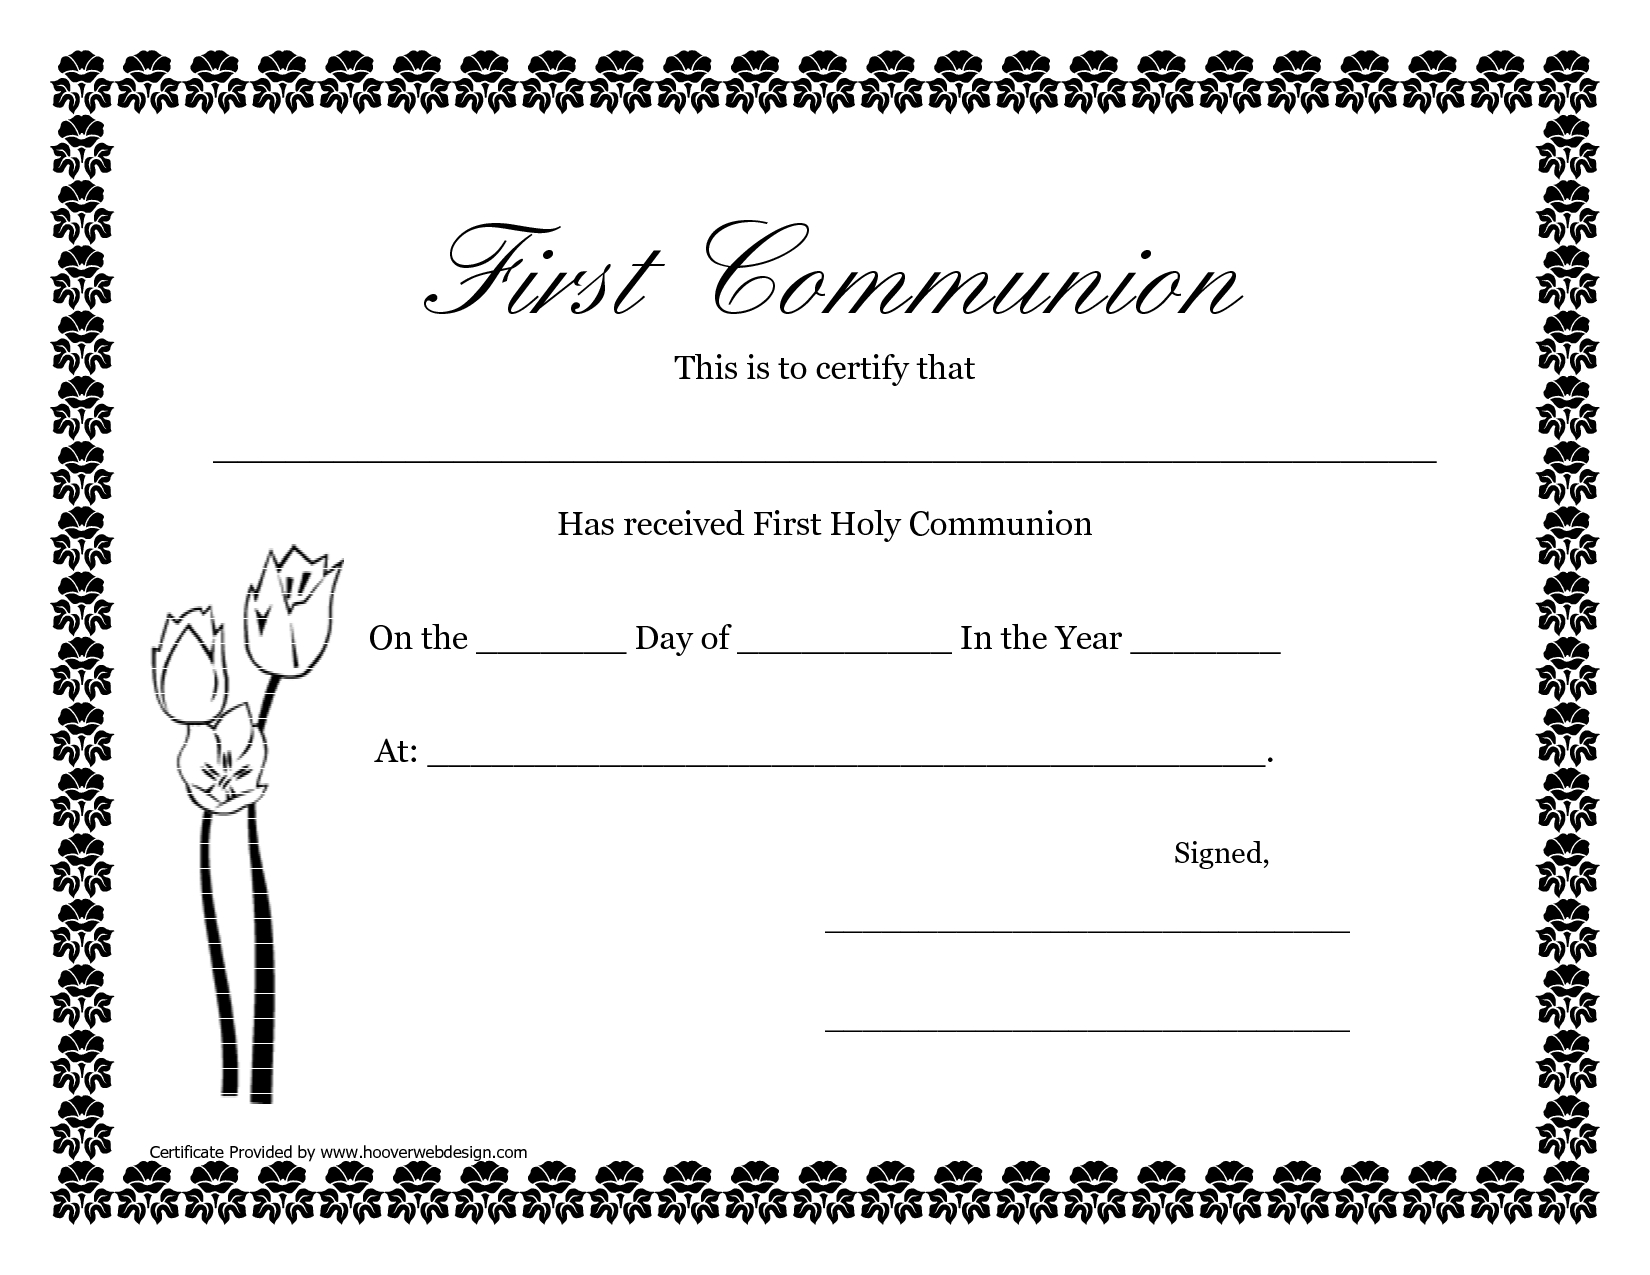 First Communion Banner Templates | Printable First Communion Intended For First Communion Banner Templates